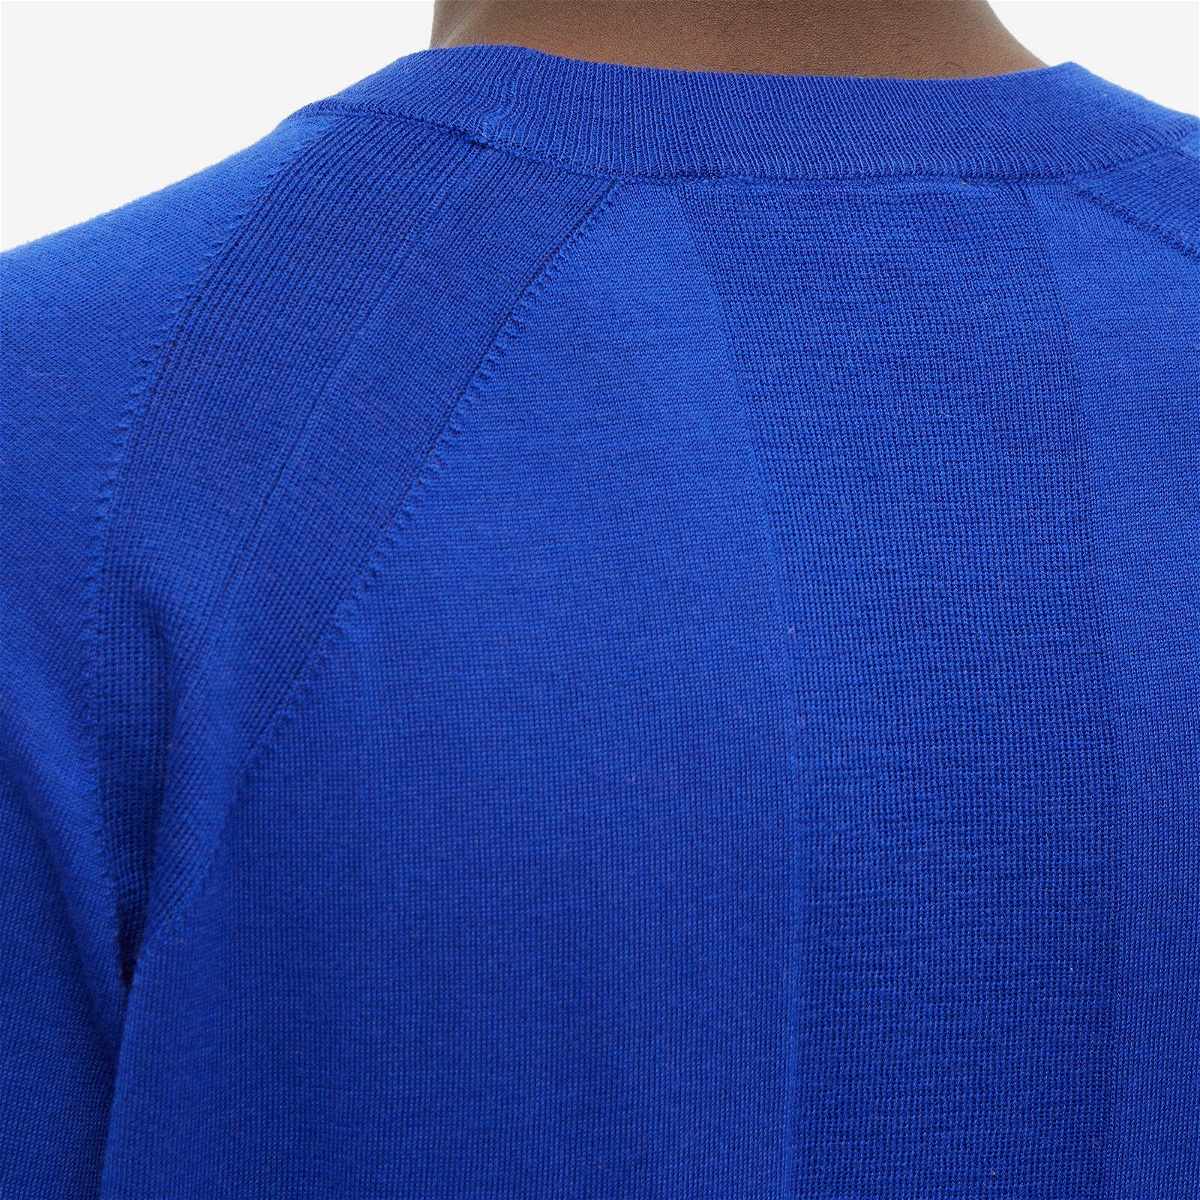 Norse Projects Men's Tech Merino Crew in Cobalt Blue Norse Projects